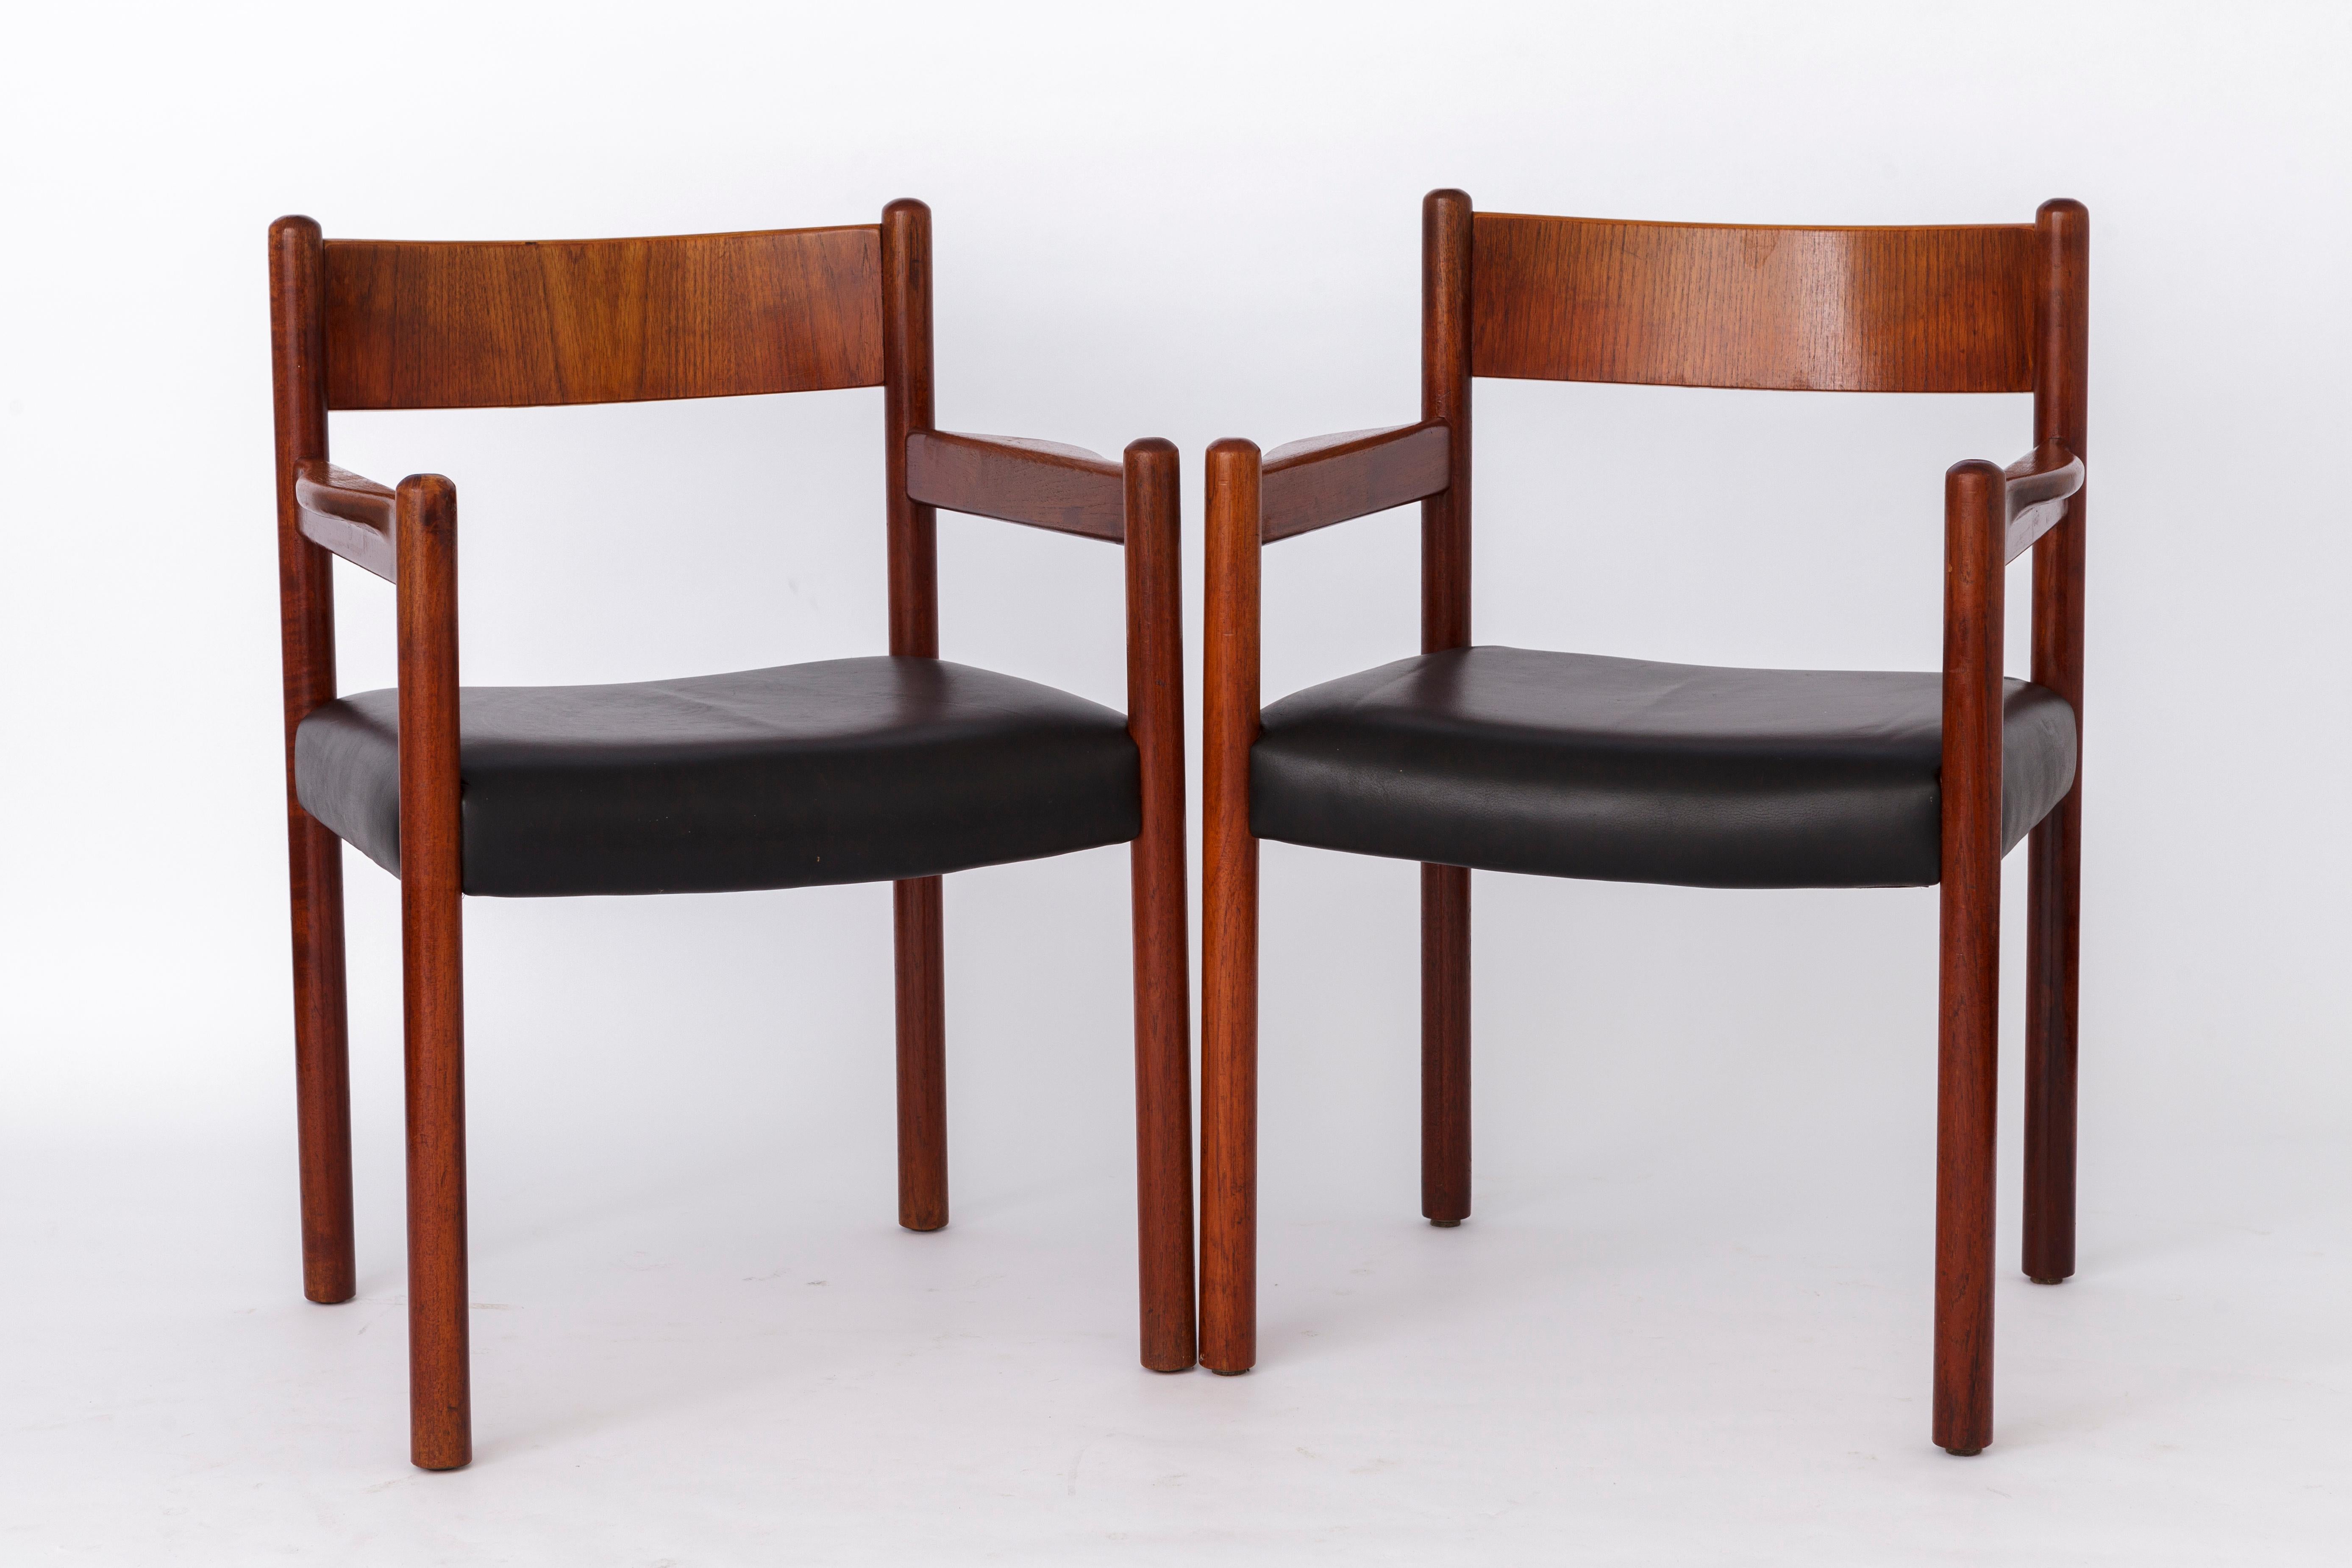 Pair of teak Danish armchairs. Can be used as dining or desk chairs. 
Unknown manufacturer. Origin: Denmark. 
Displayed price is for a pair. Totally up to 12 available. 

Good vintage condition. 
Sturdy, massive teak frame. 
Original black leather